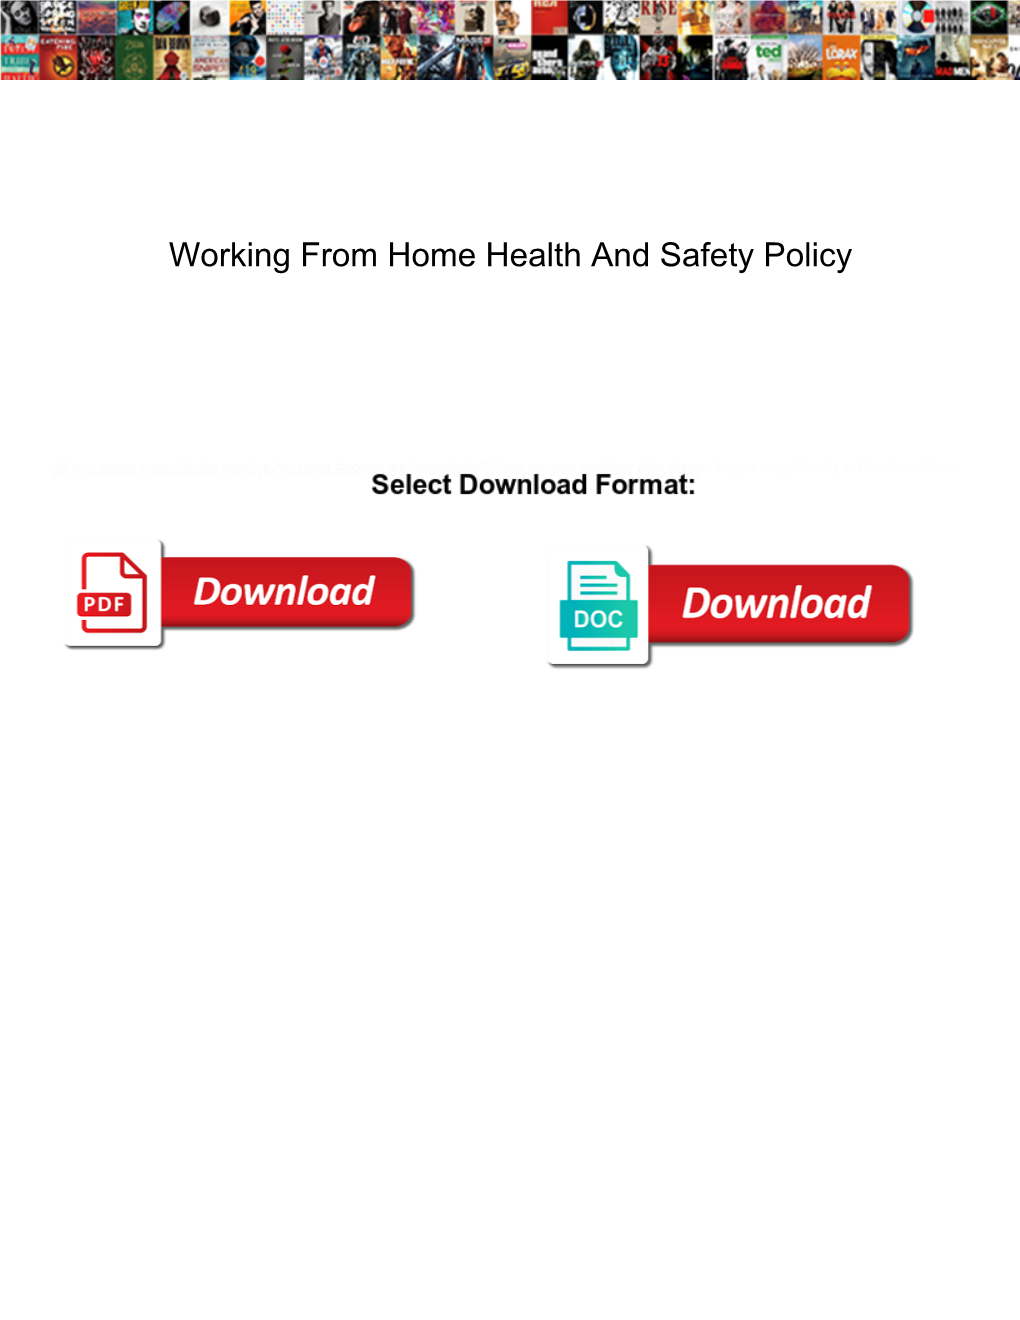 Working from Home Health and Safety Policy